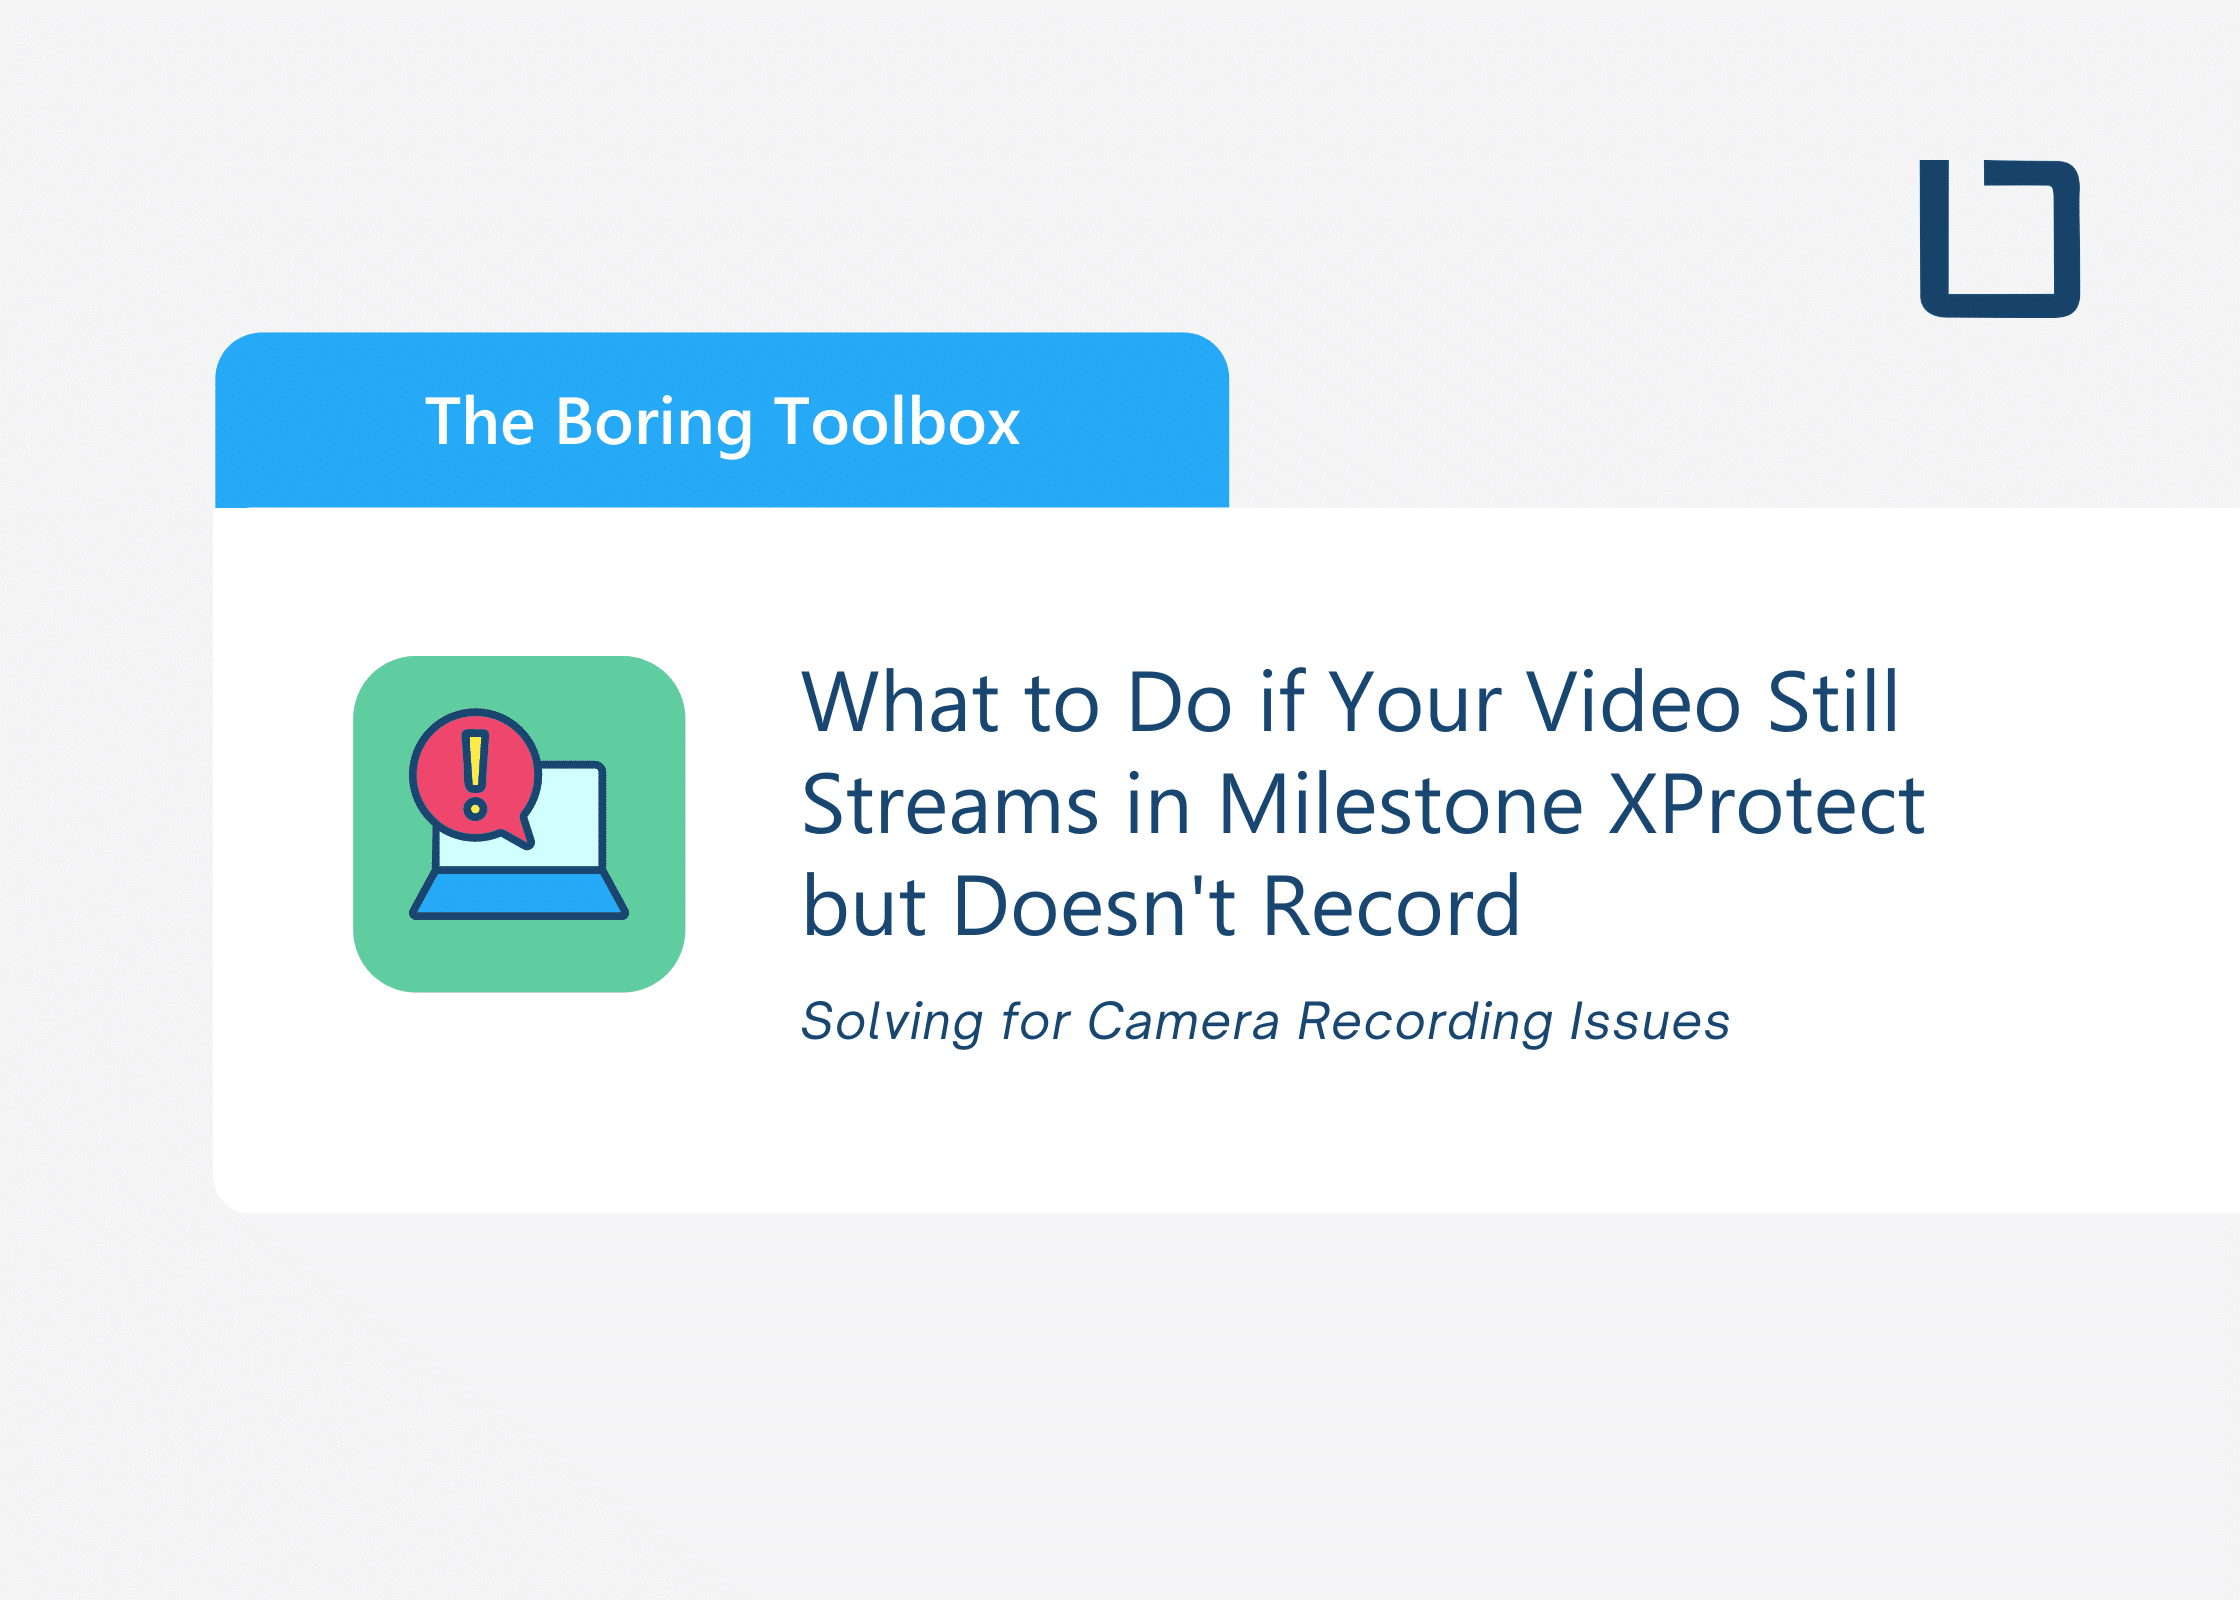 What to Do if Your Video Still Streams Live in Milestone XProtect but Doesn’t Record